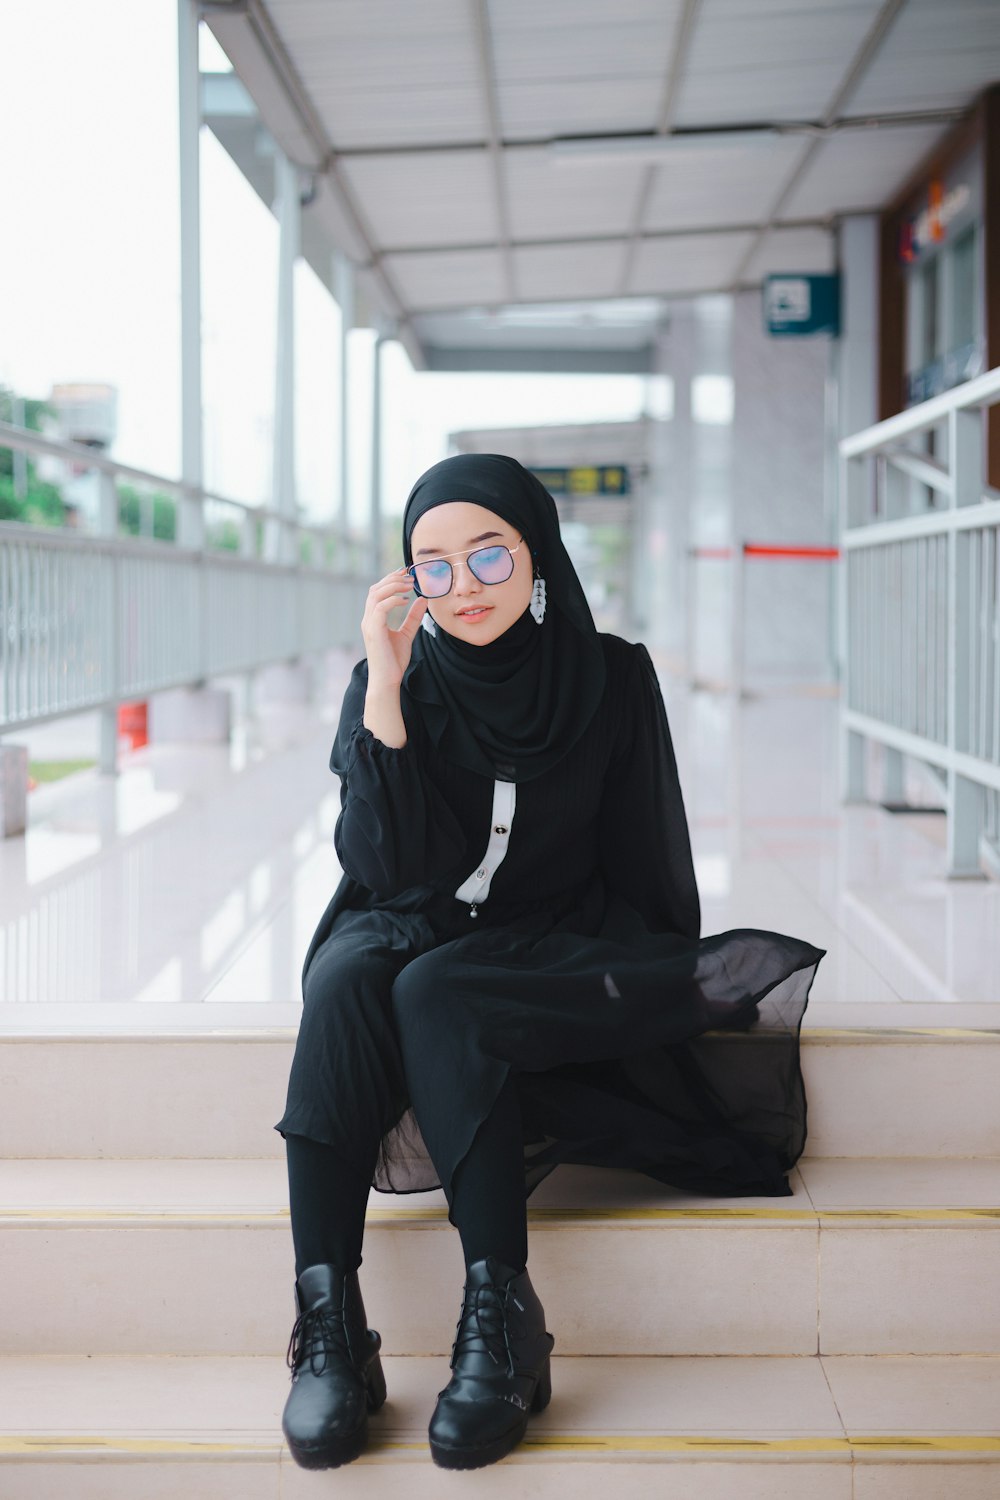 a woman in a black hijab is sitting on some steps